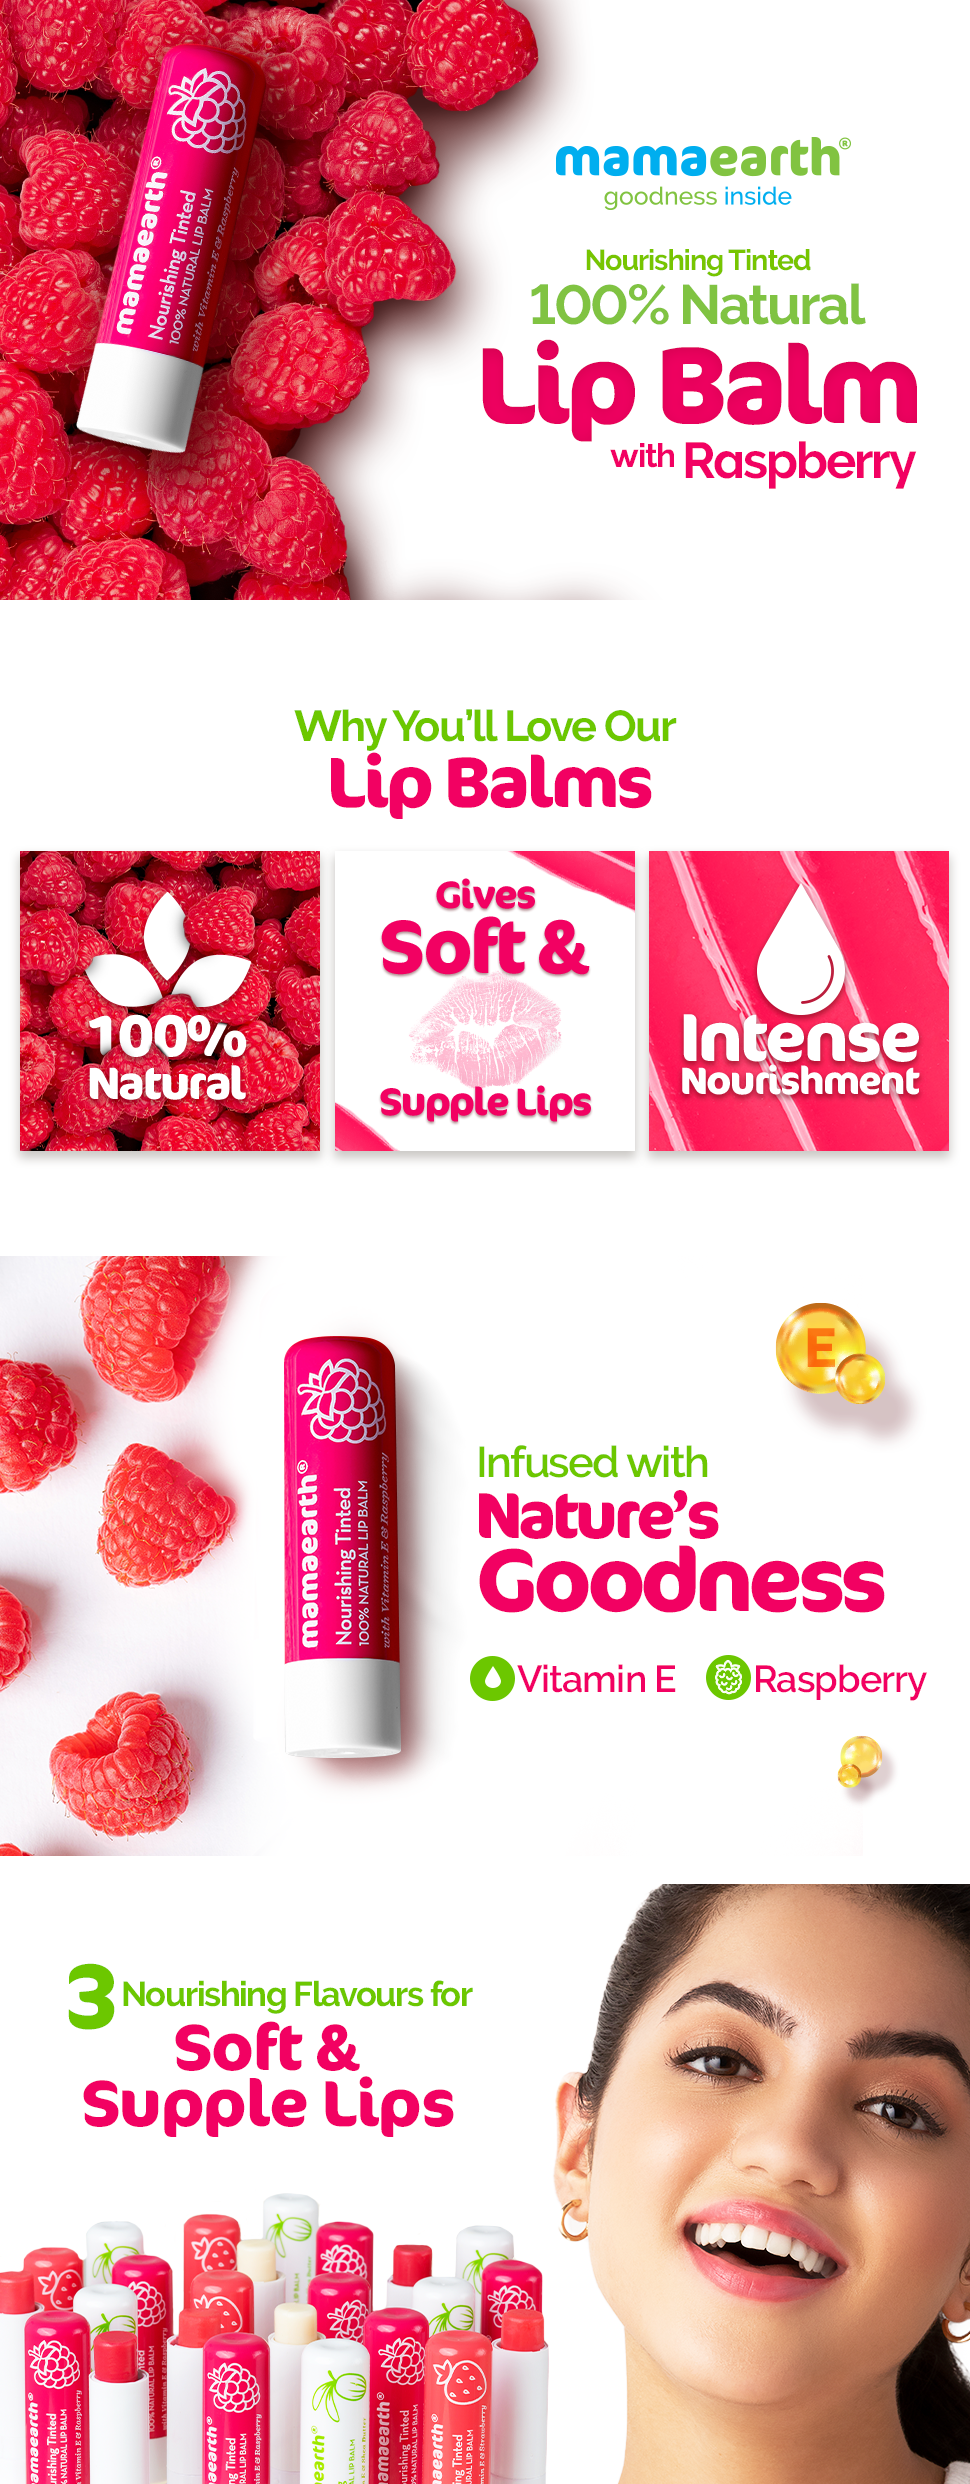 Nourishing Tinted 100% Natural Lip Balm with Vitamin E and Raspberry 